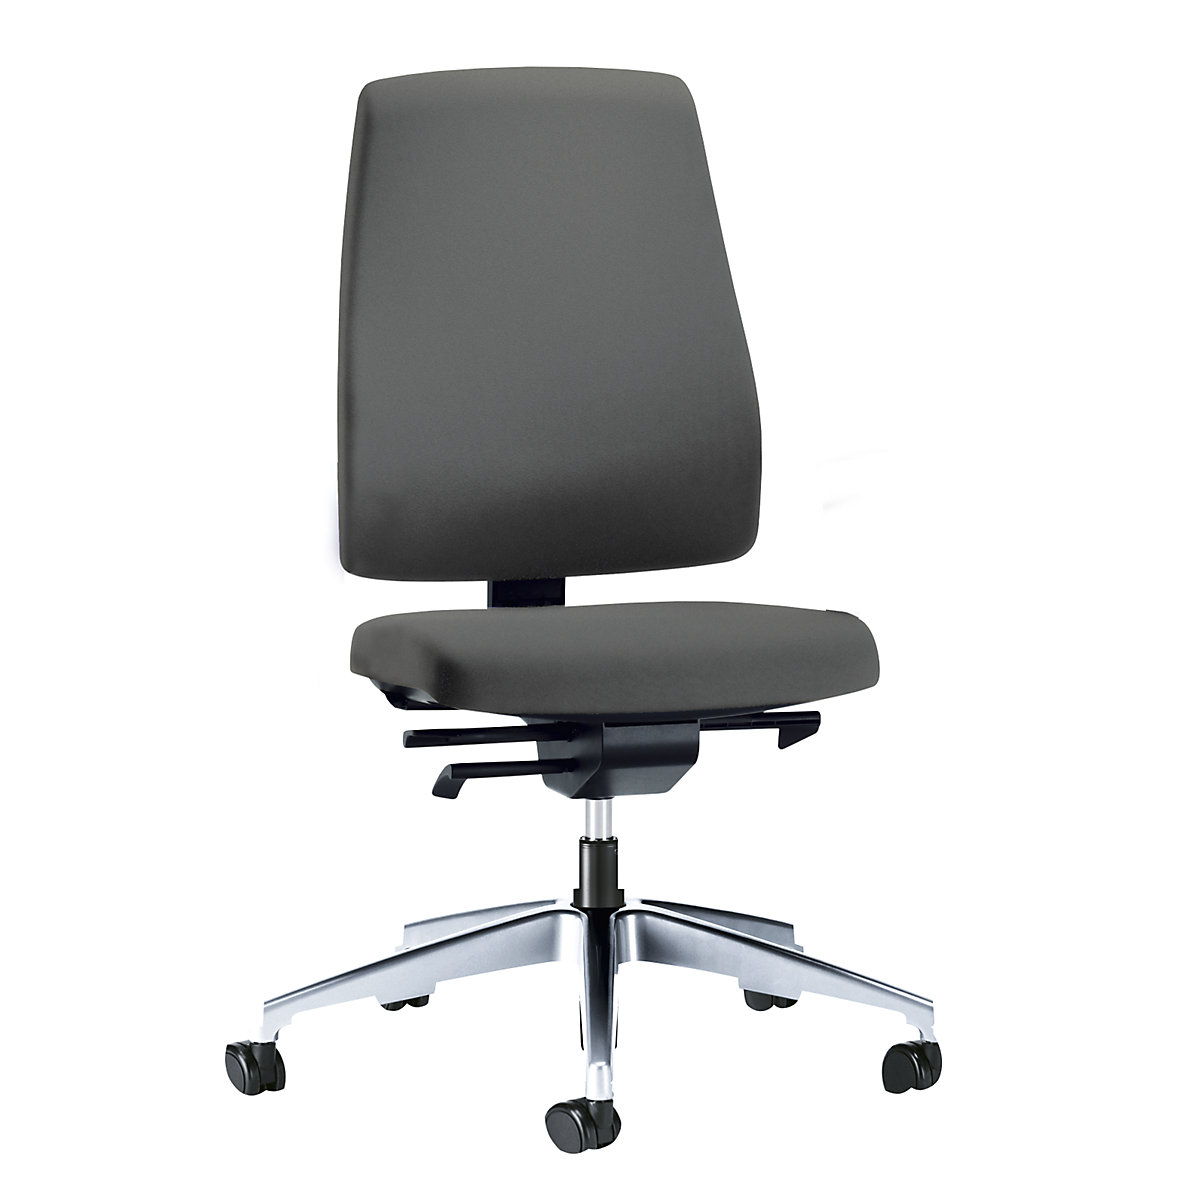 GOAL office swivel chair, back rest height 530 mm – interstuhl, polished frame, with hard castors, iron grey, seat depth 410 mm-3